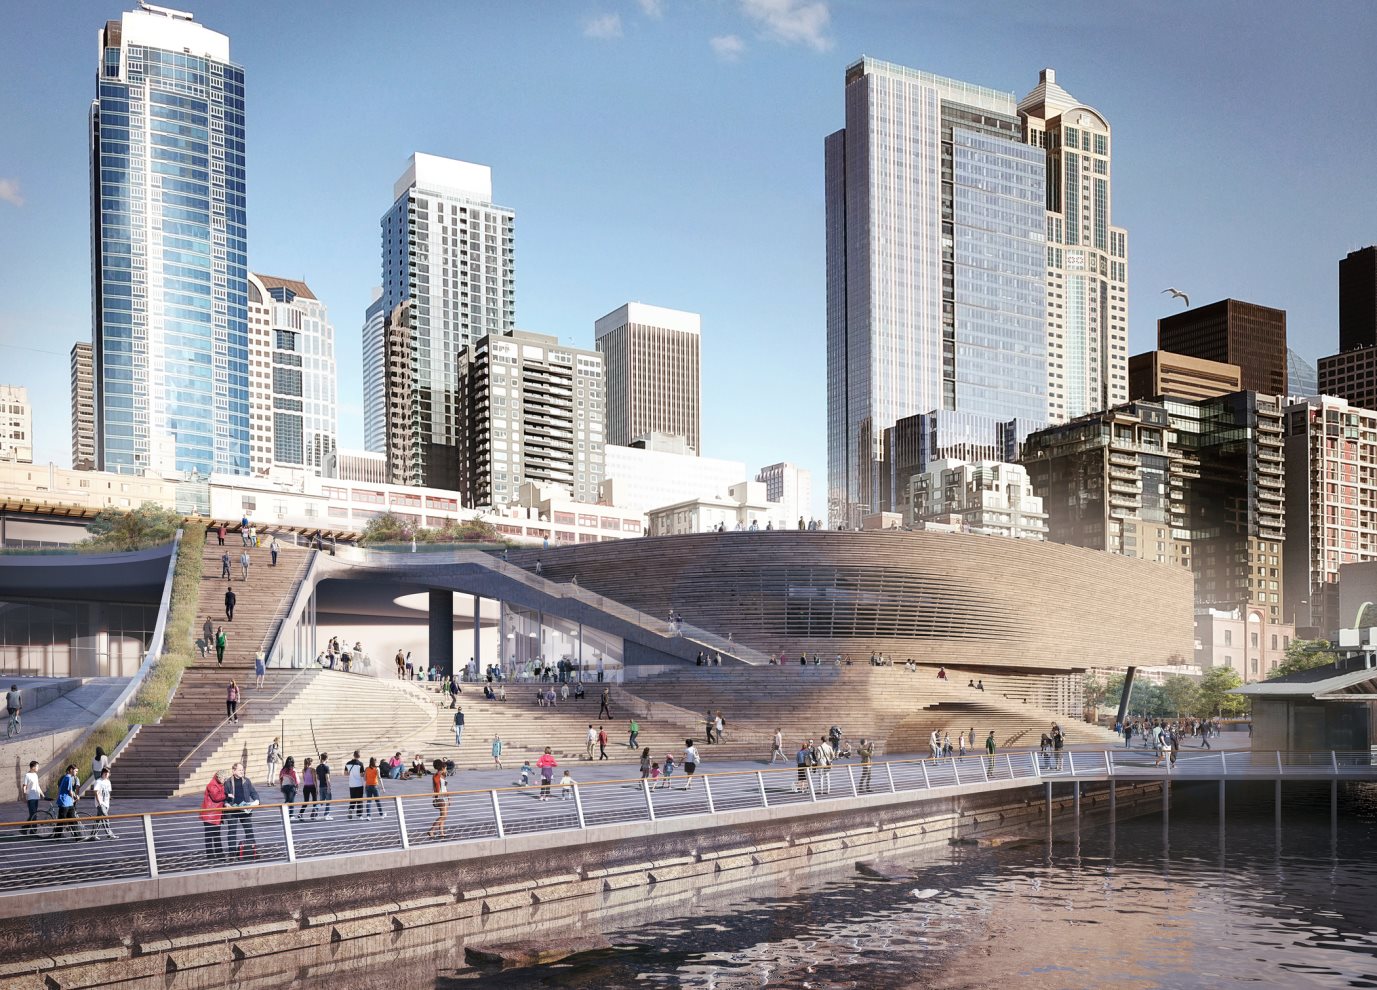 Outdoor rendering of the waterfront Seattle Aquarium, with descending stairs